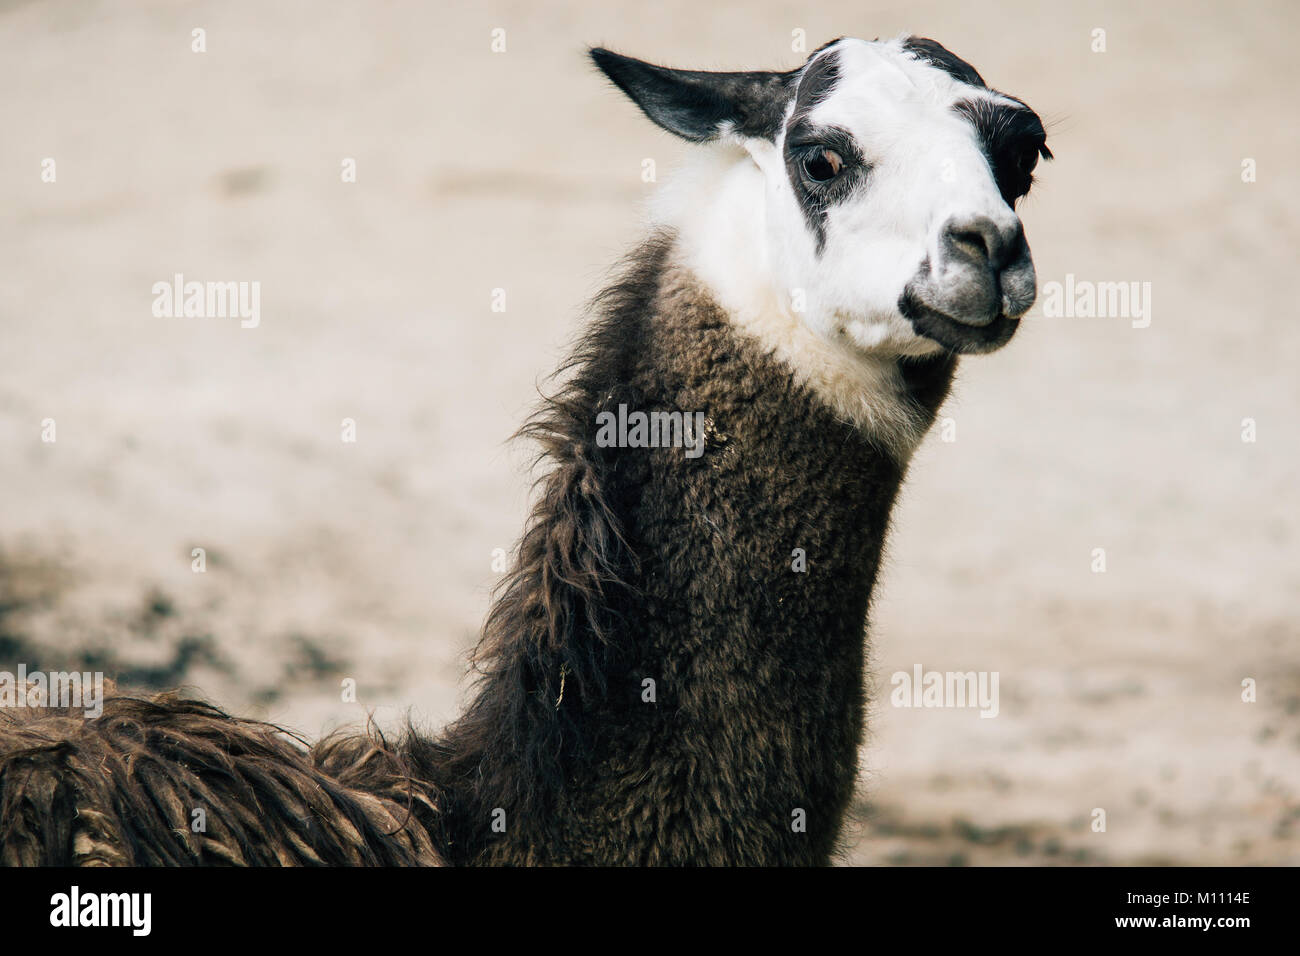 Brown and white patched llama closeup portrait Stock Photo